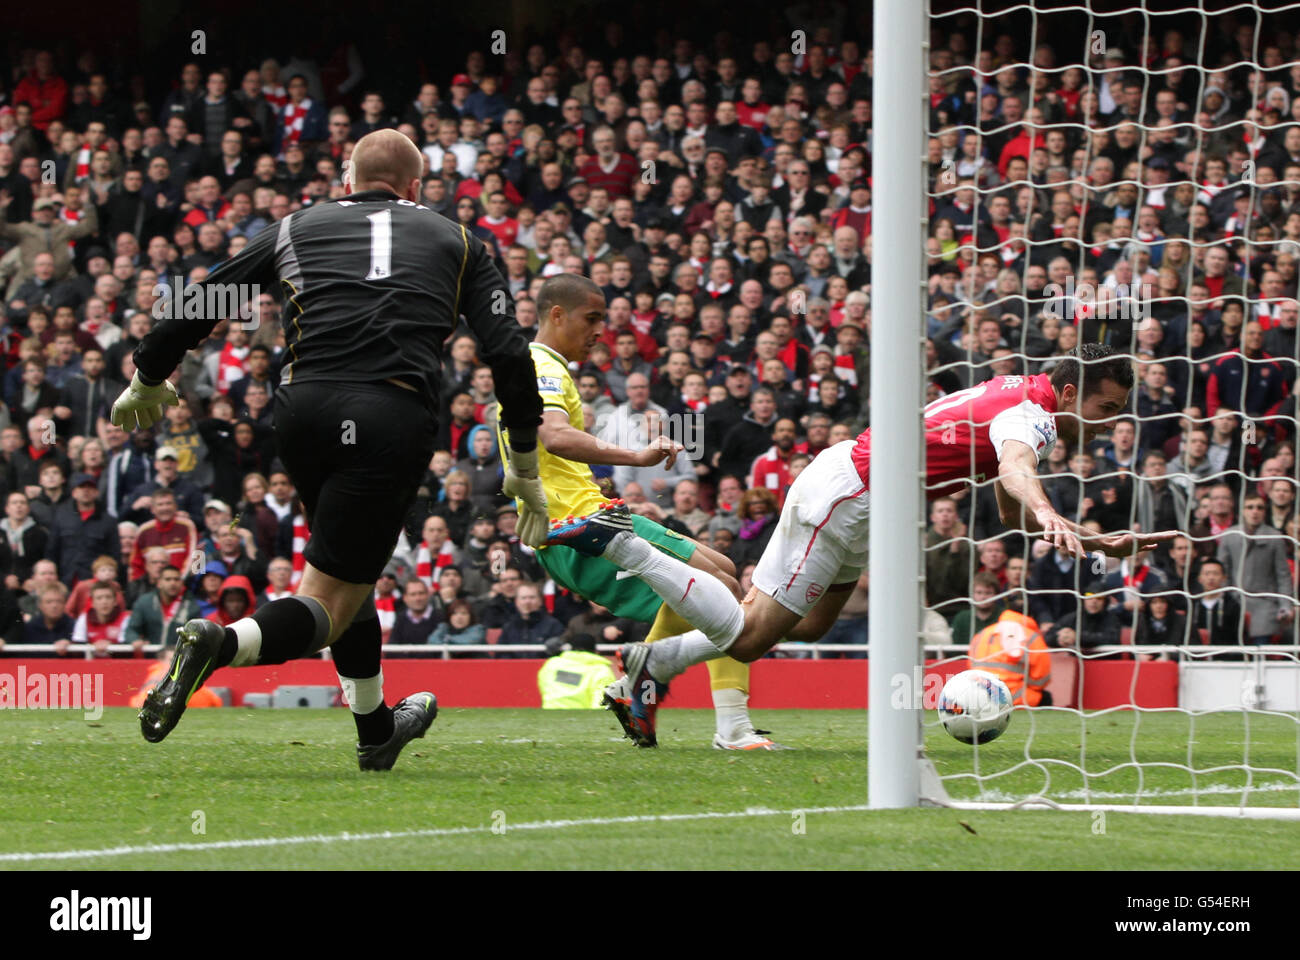 Arsenal's Robin Van Persie (right) falls over in the penalty area after being challenged by Norwich City's Kyle Naughton, during their Barclays Premier League fooball match at the Emirates Stadium in north London. PRESS ASSOCIATION Photo. Picture date: Saturday May 5, 2012. Photo credit should read: Yui Mok/PA Wire Stock Photo